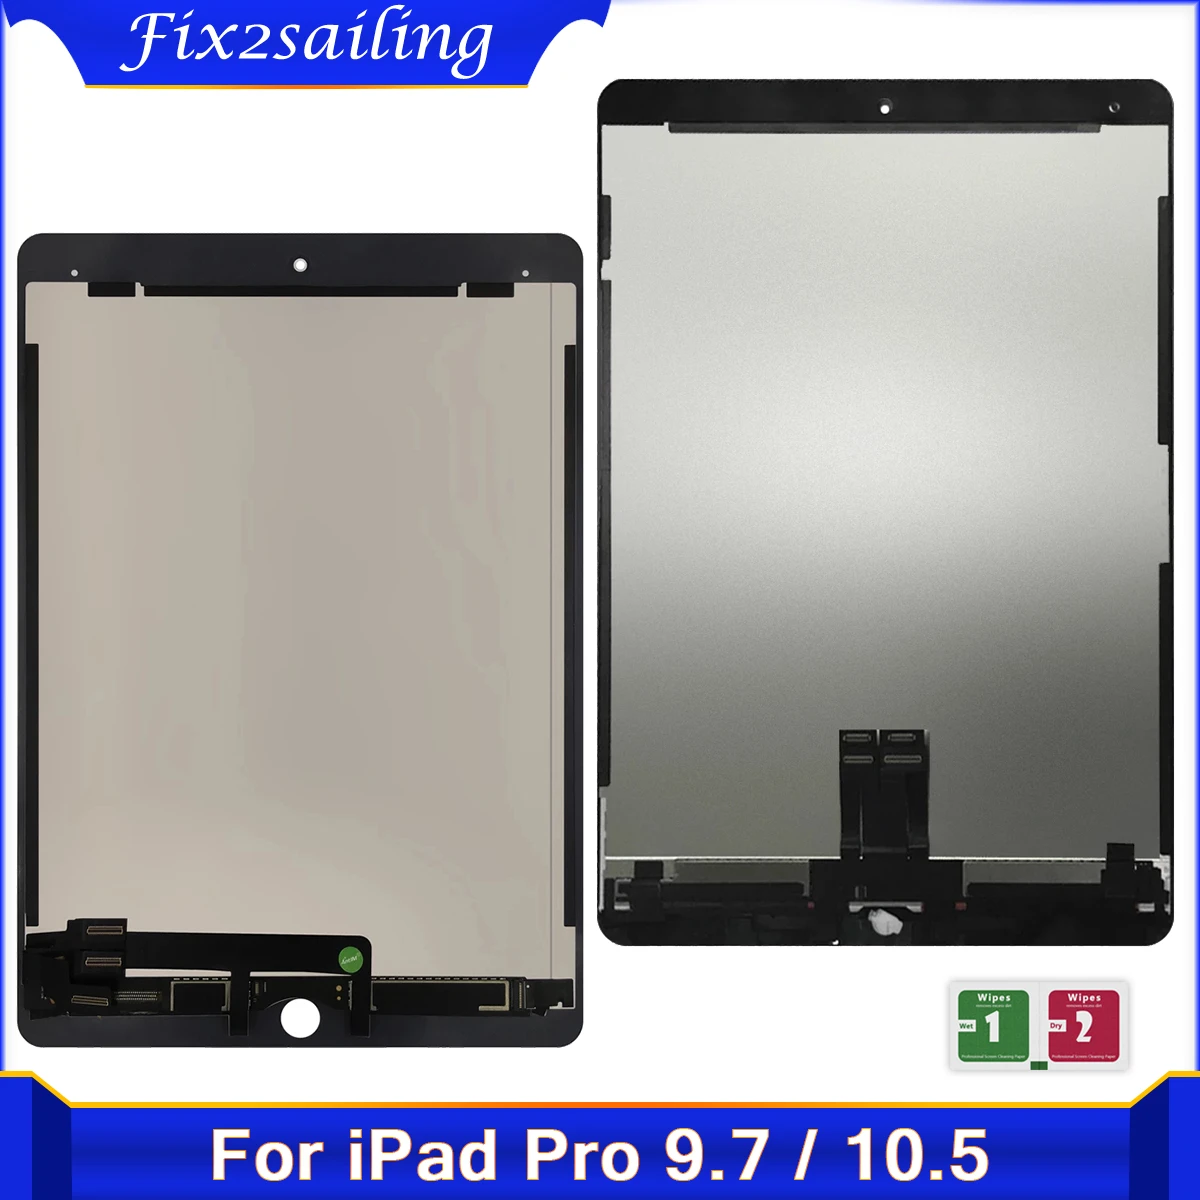 iPad Pro 9.7" LCD Display Touch Screen Digitizer Assembly A1673 A1674 A1675 USA